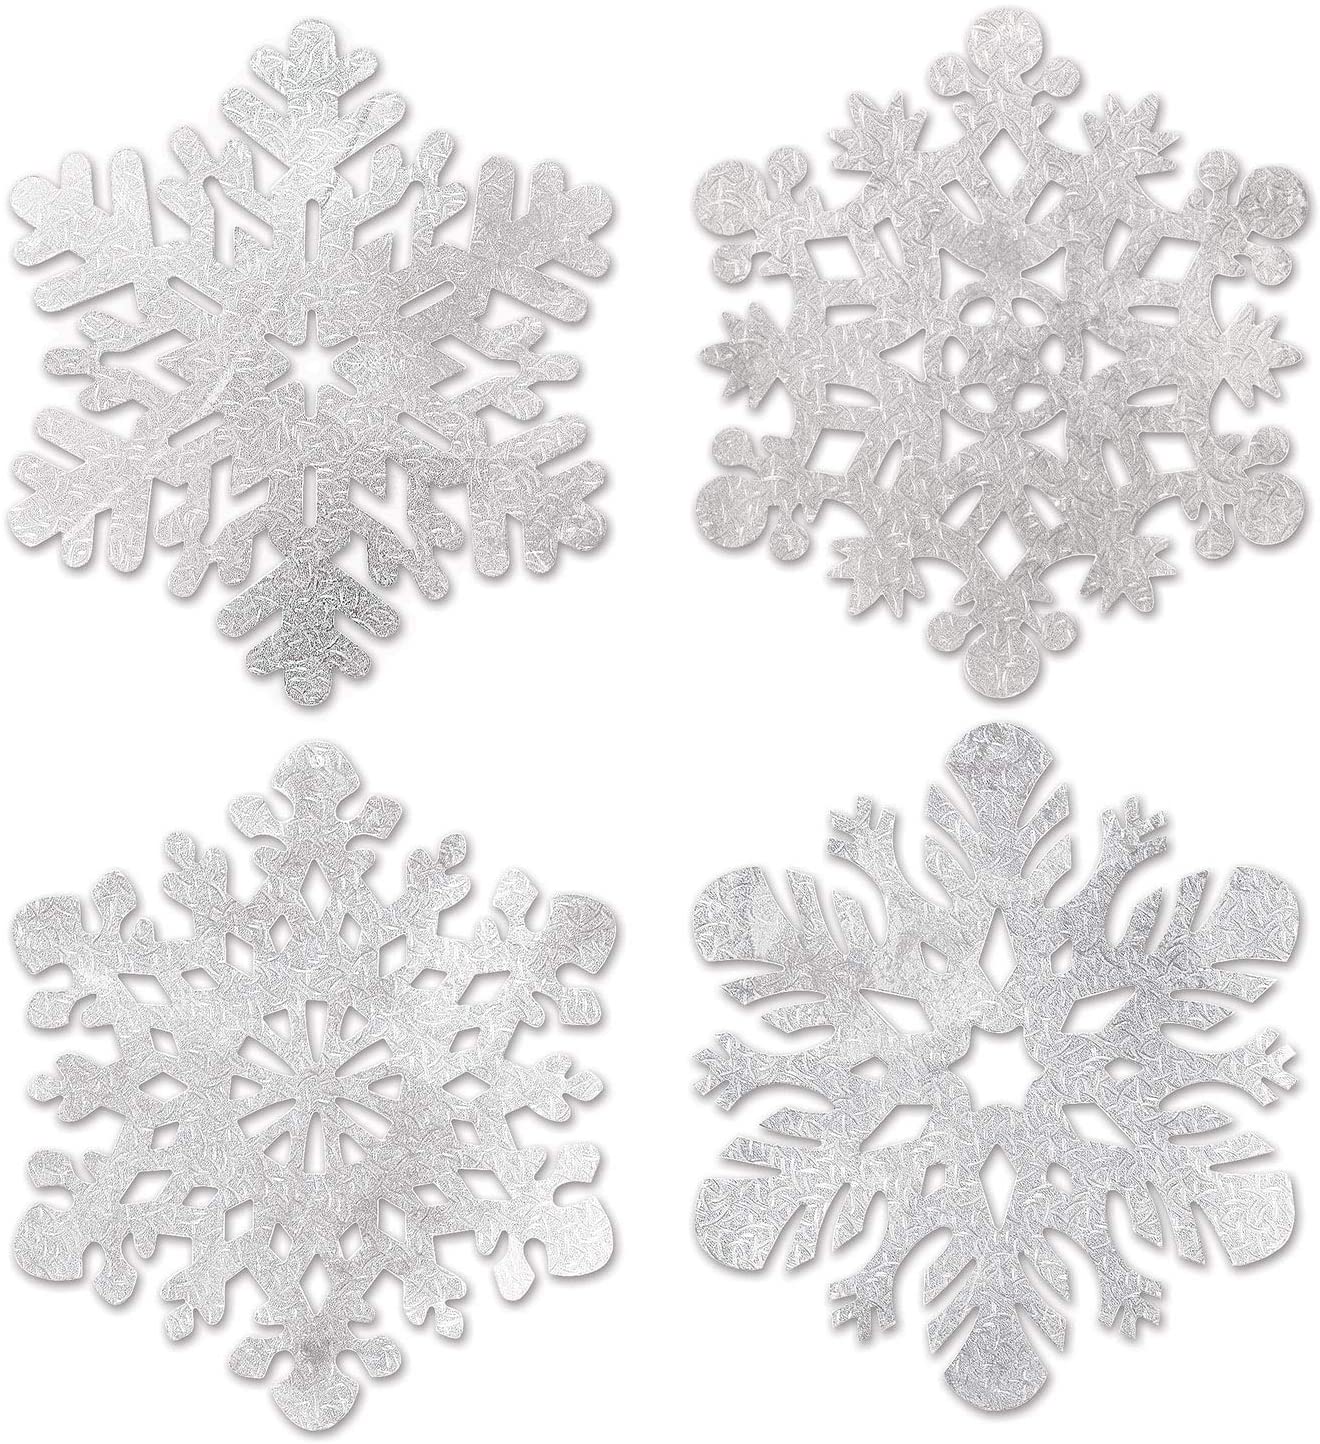 Beistle 1-Pack Snowflake Table Cover 54-Inch by 108-Inch 